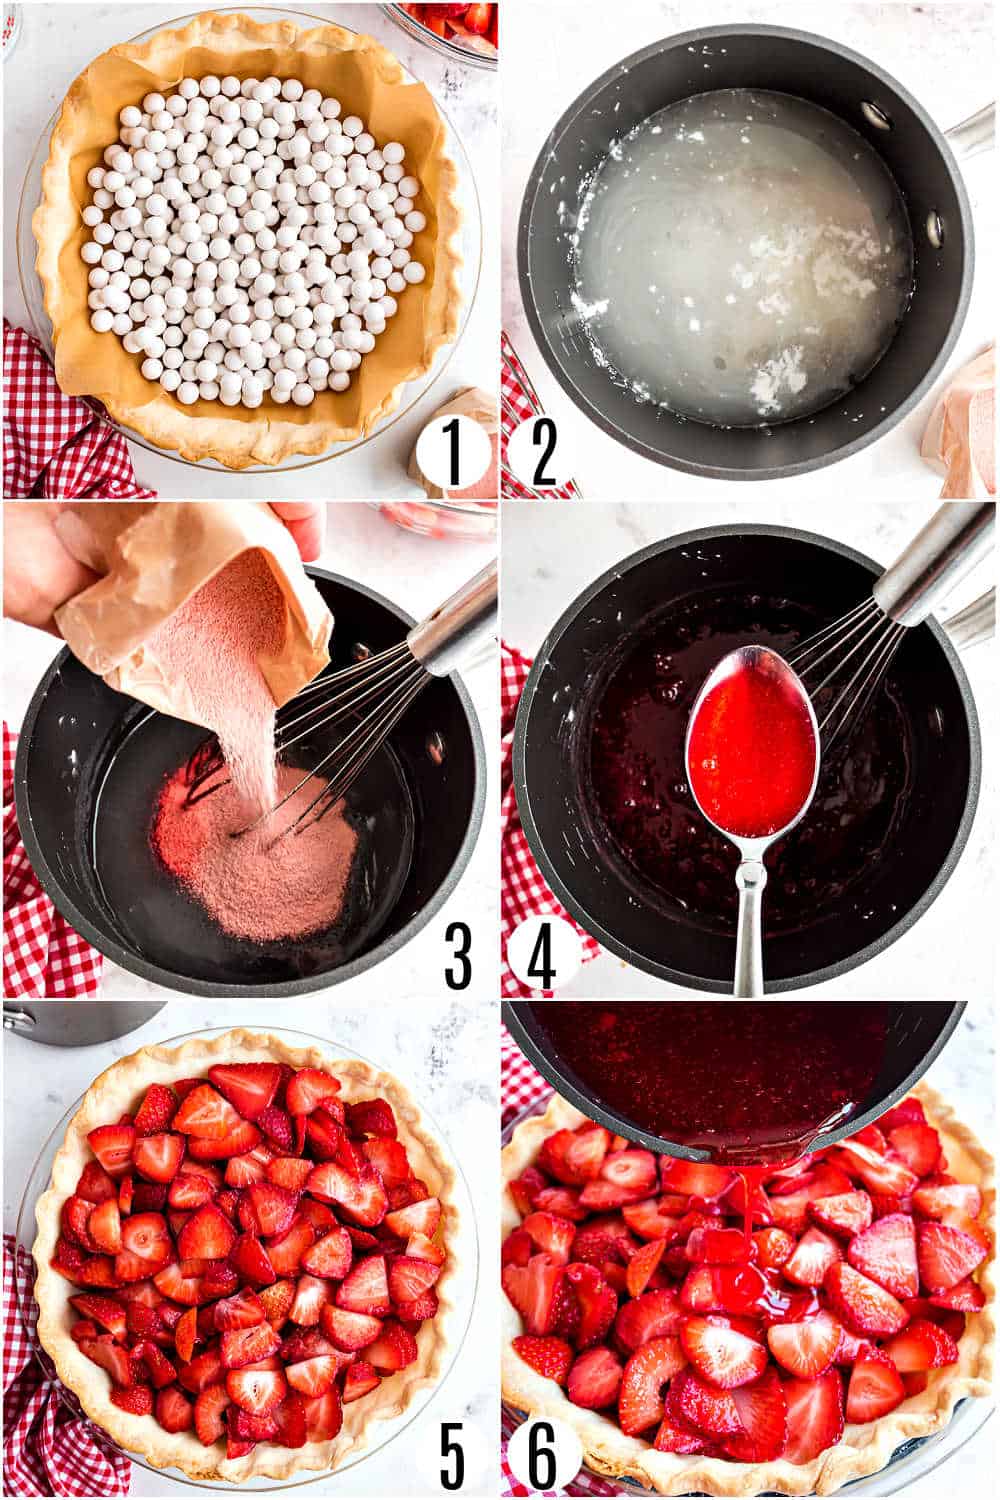 Step by step photos showing how to make strawberry pie.